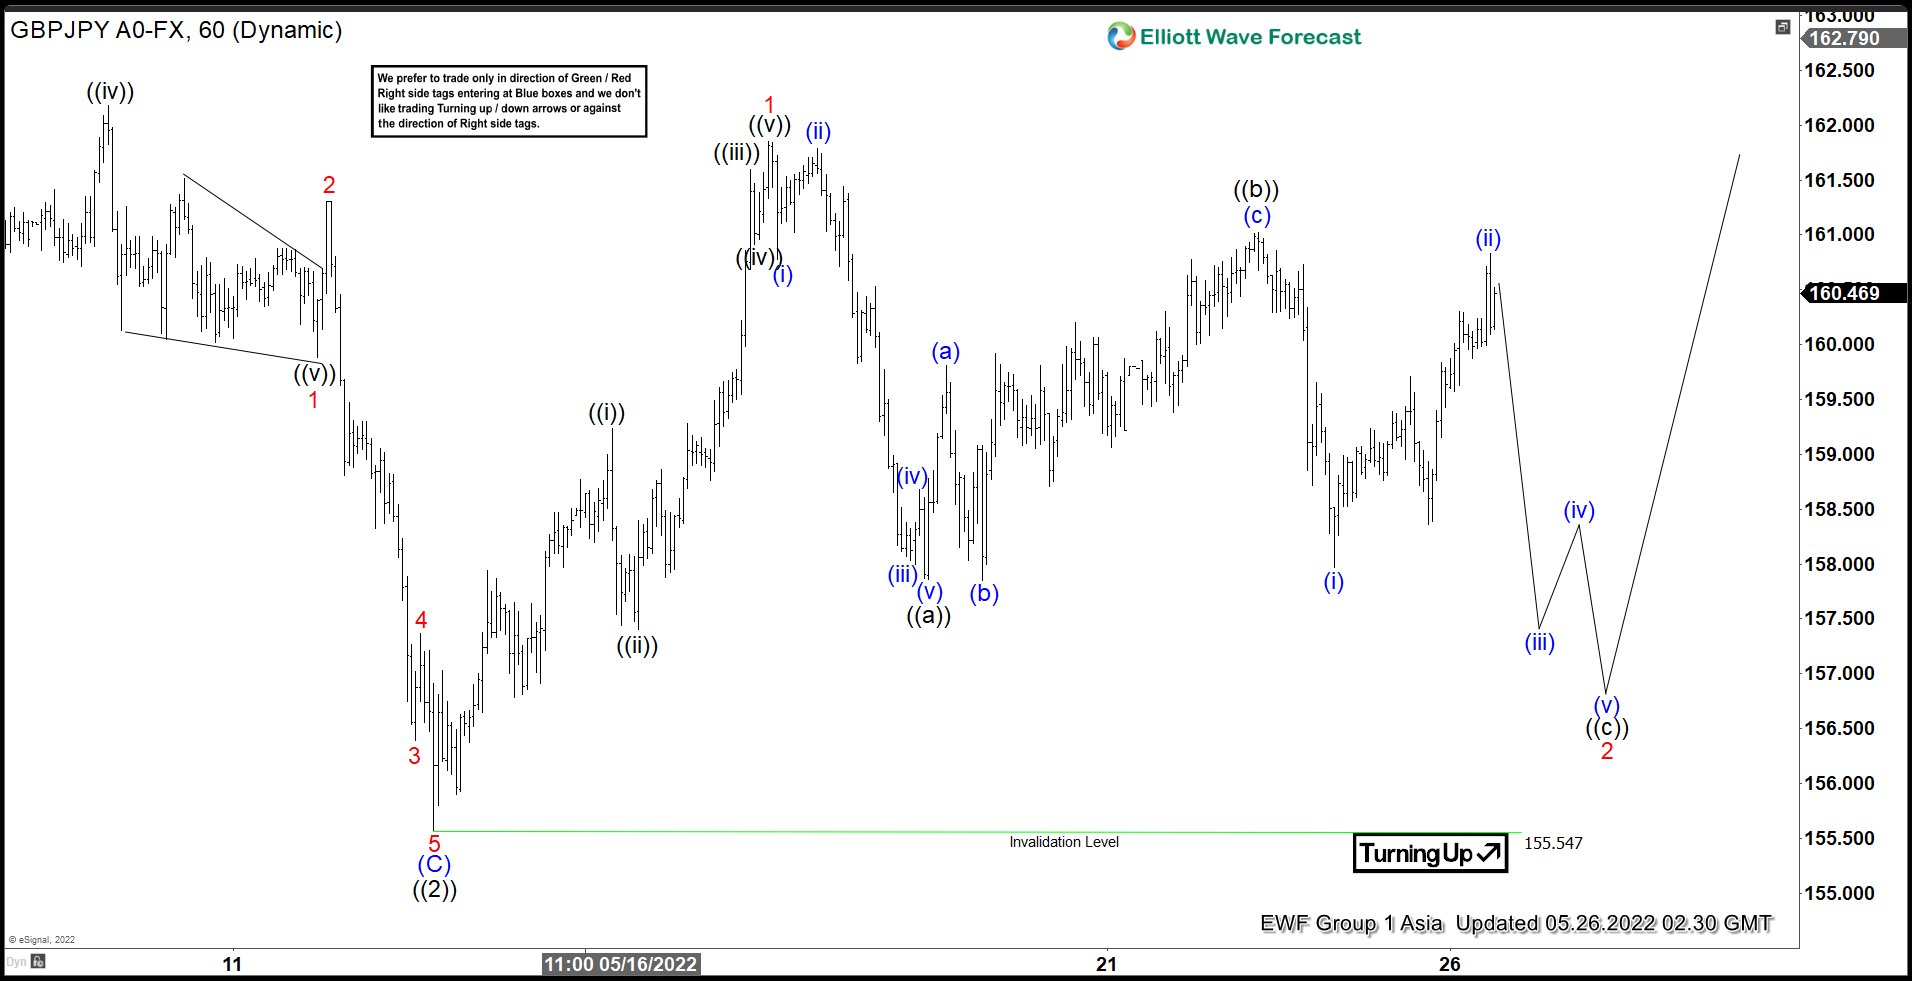 Elliott Wave View: GBPJPY Looking for the Next Leg Higher